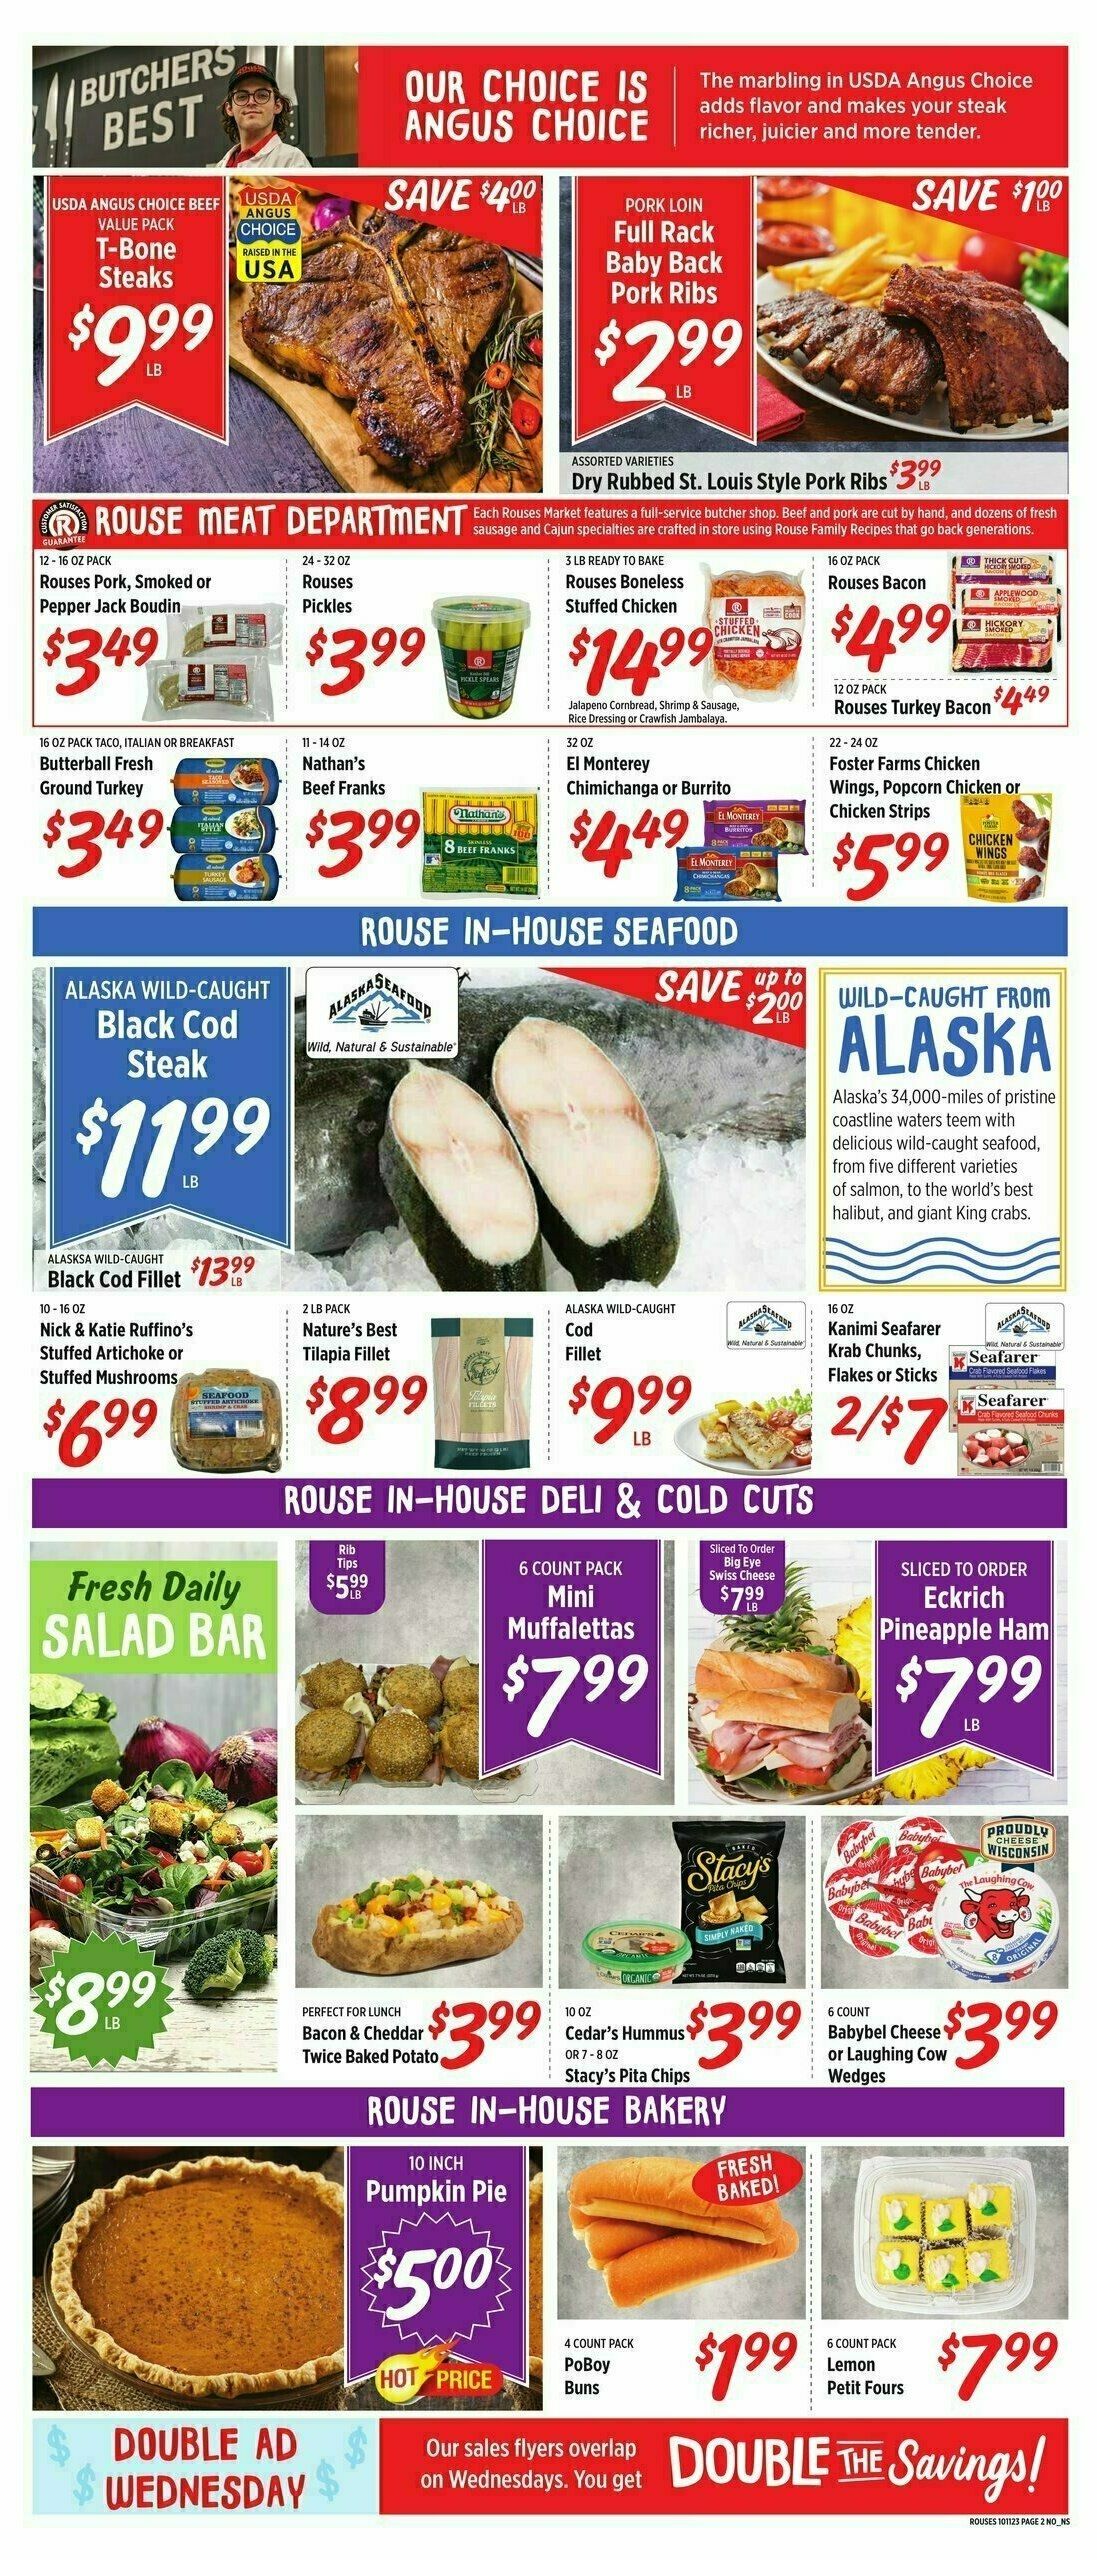 Rouses Markets Weekly Ad from October 11